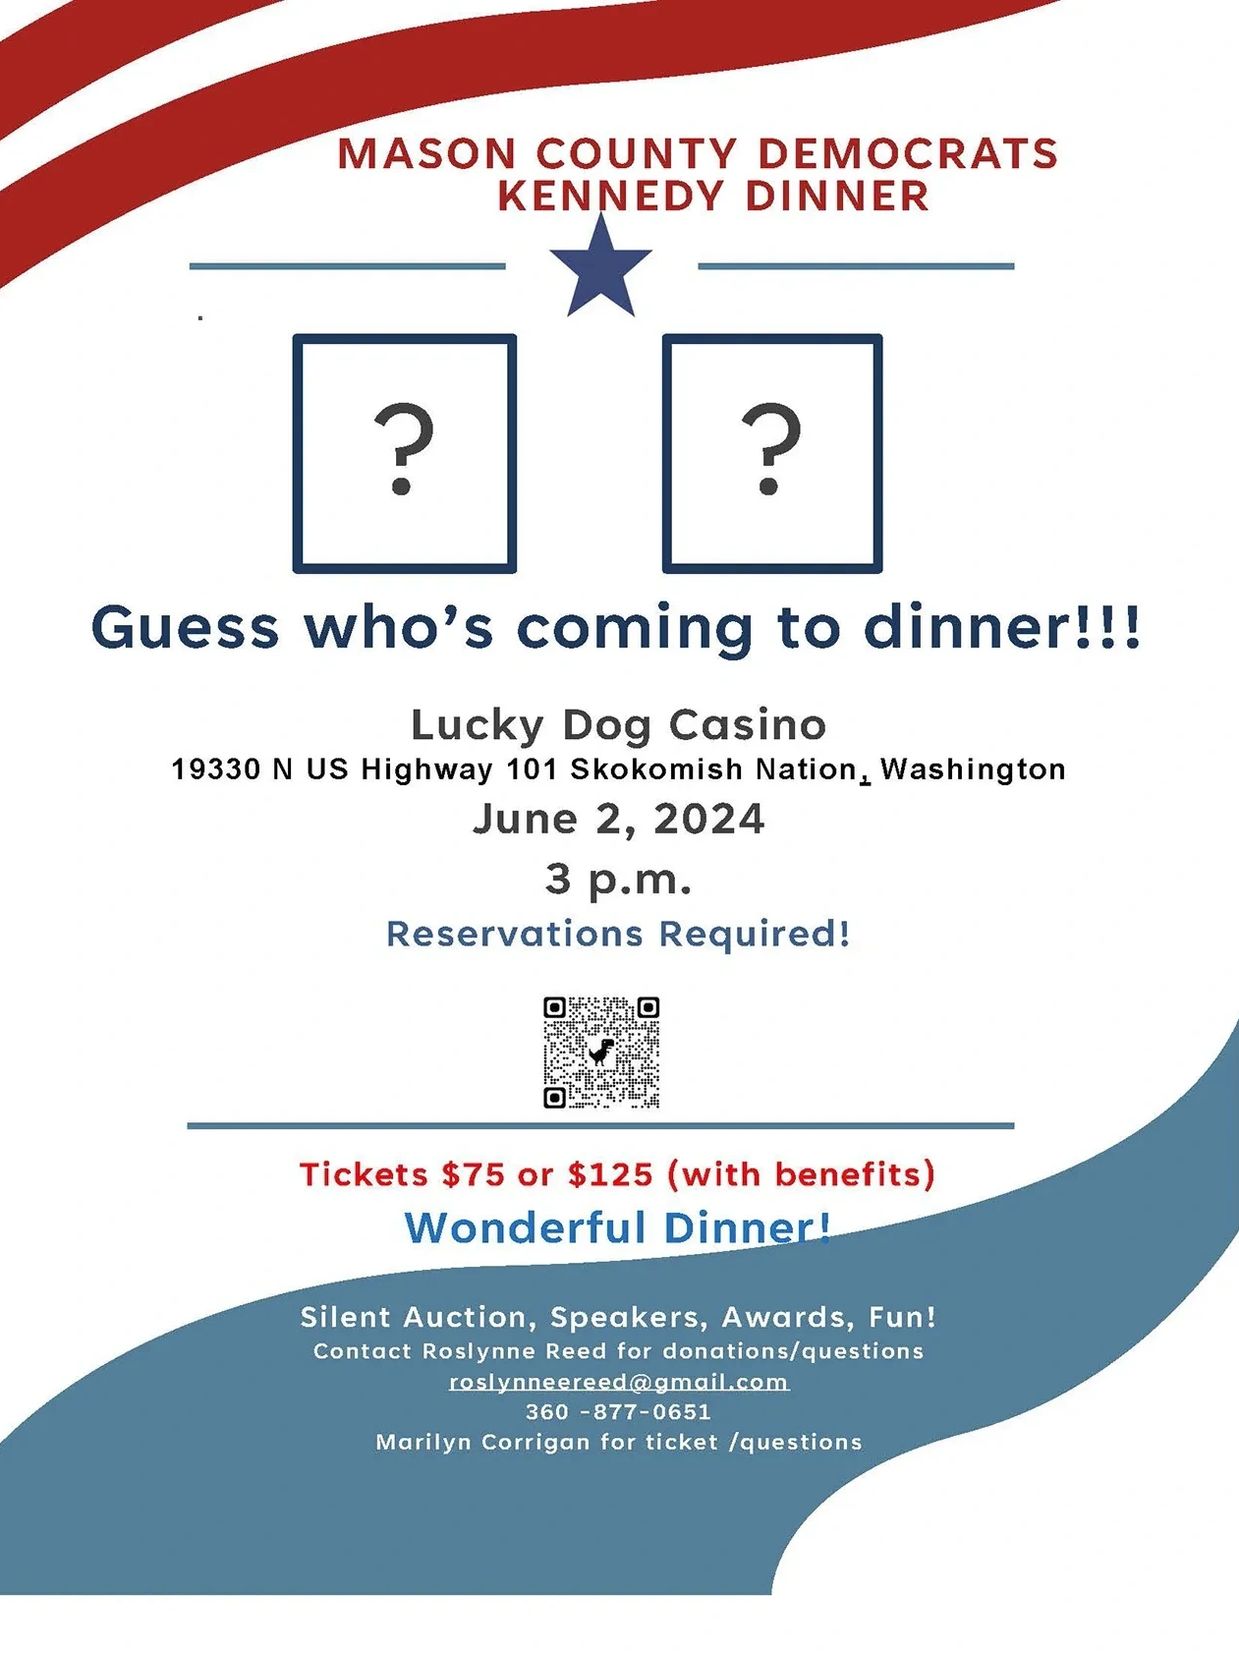 MASON COUNTY DEMOCRATS KENNEDY DINNER: June 2, 2024
3 p.m.  Lucky Dog Casino. Reservations Required!